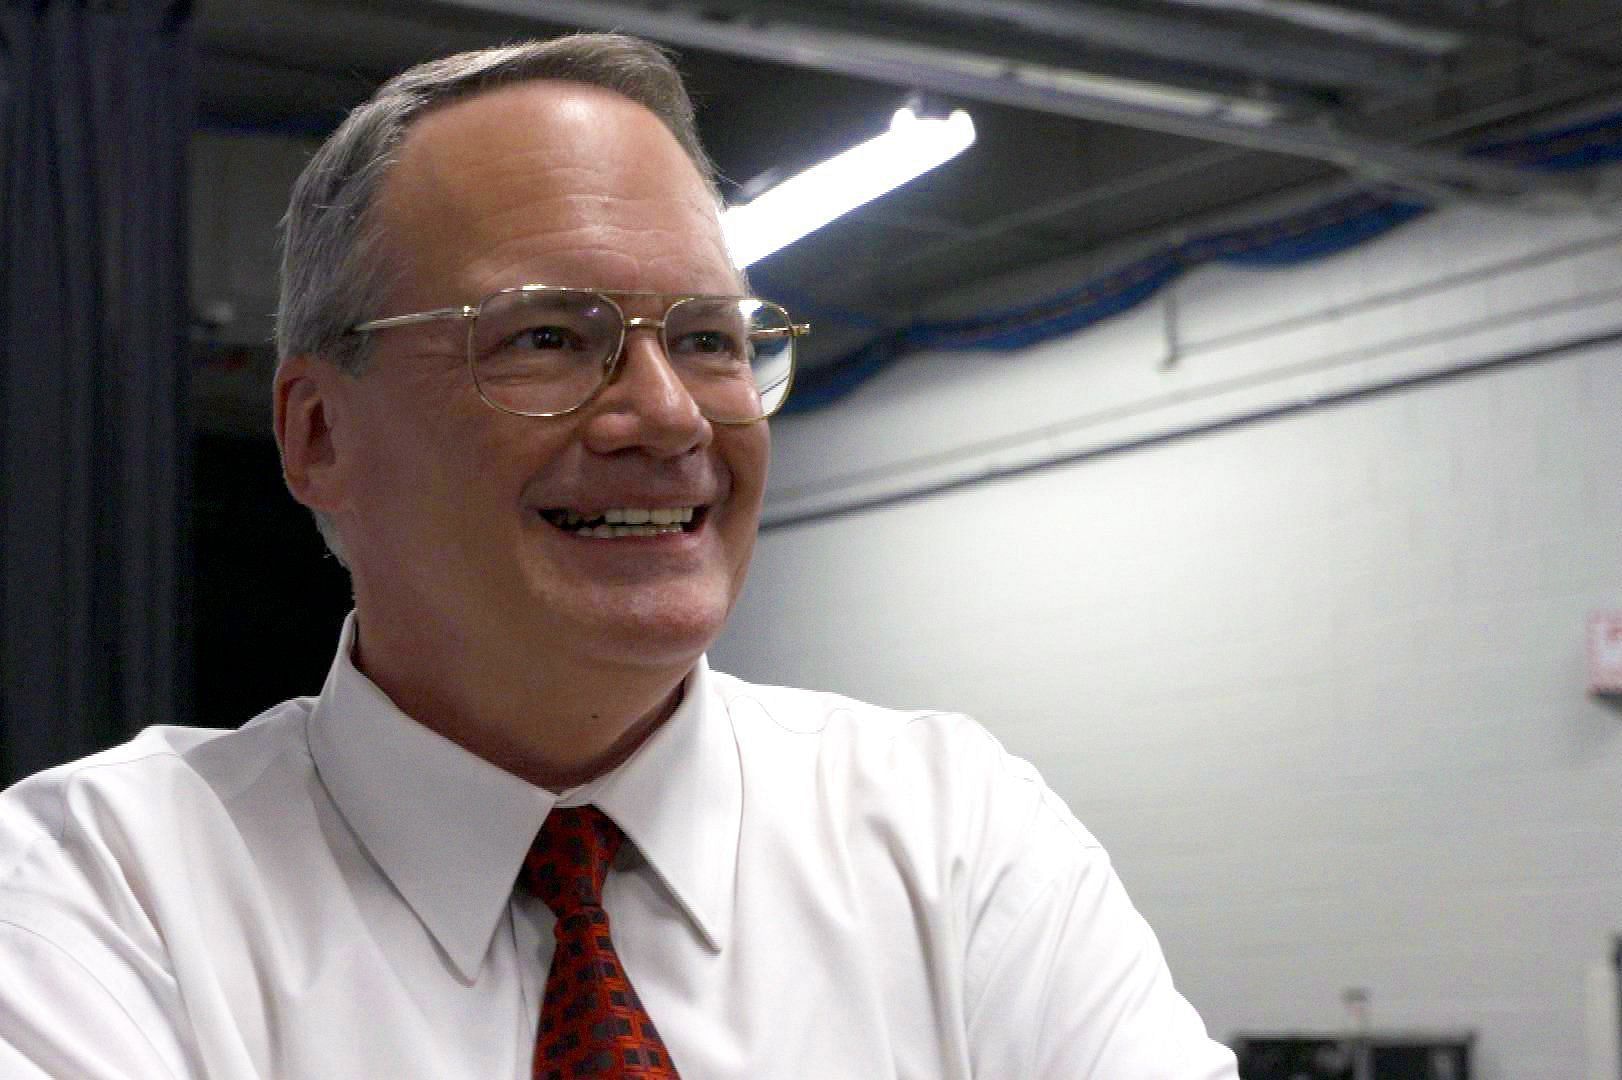 Jim Cornette is a former WWE manager